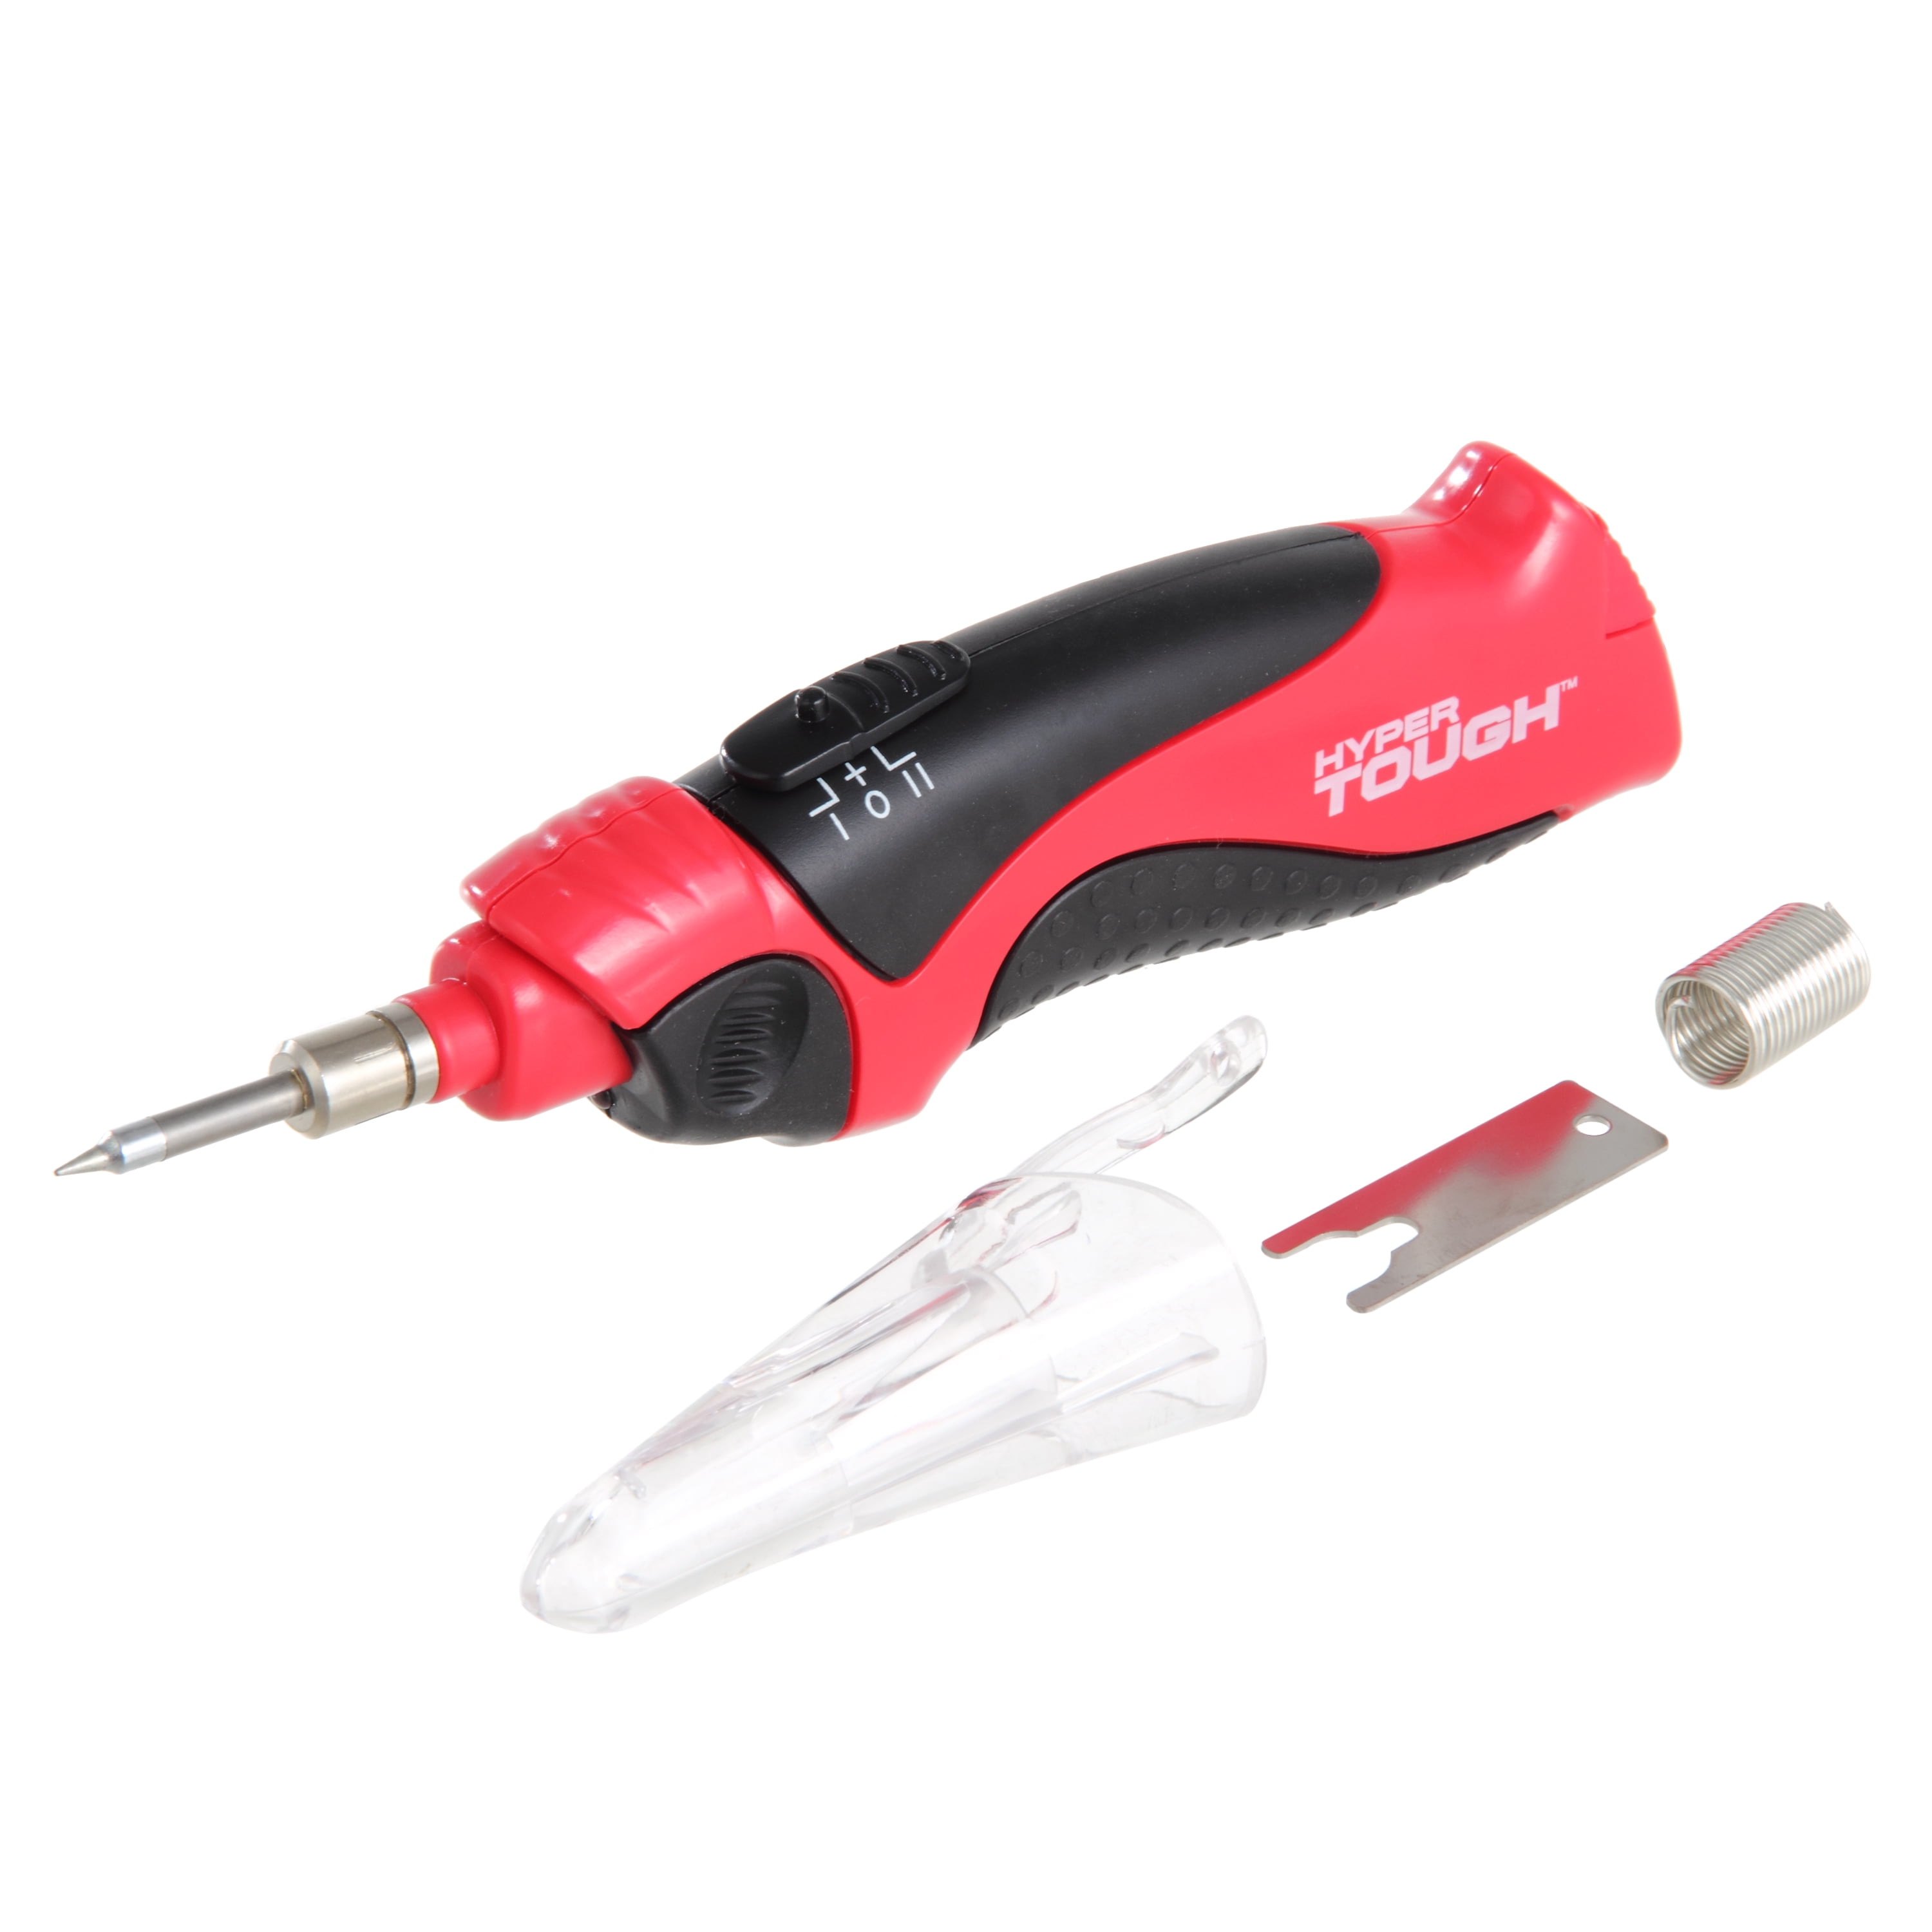 Home Repair Welding Gun Comfortable Grip Heat Evenly Small and Convenient Anti-Drop and Durable Portable USB Electric Soldering Iron 